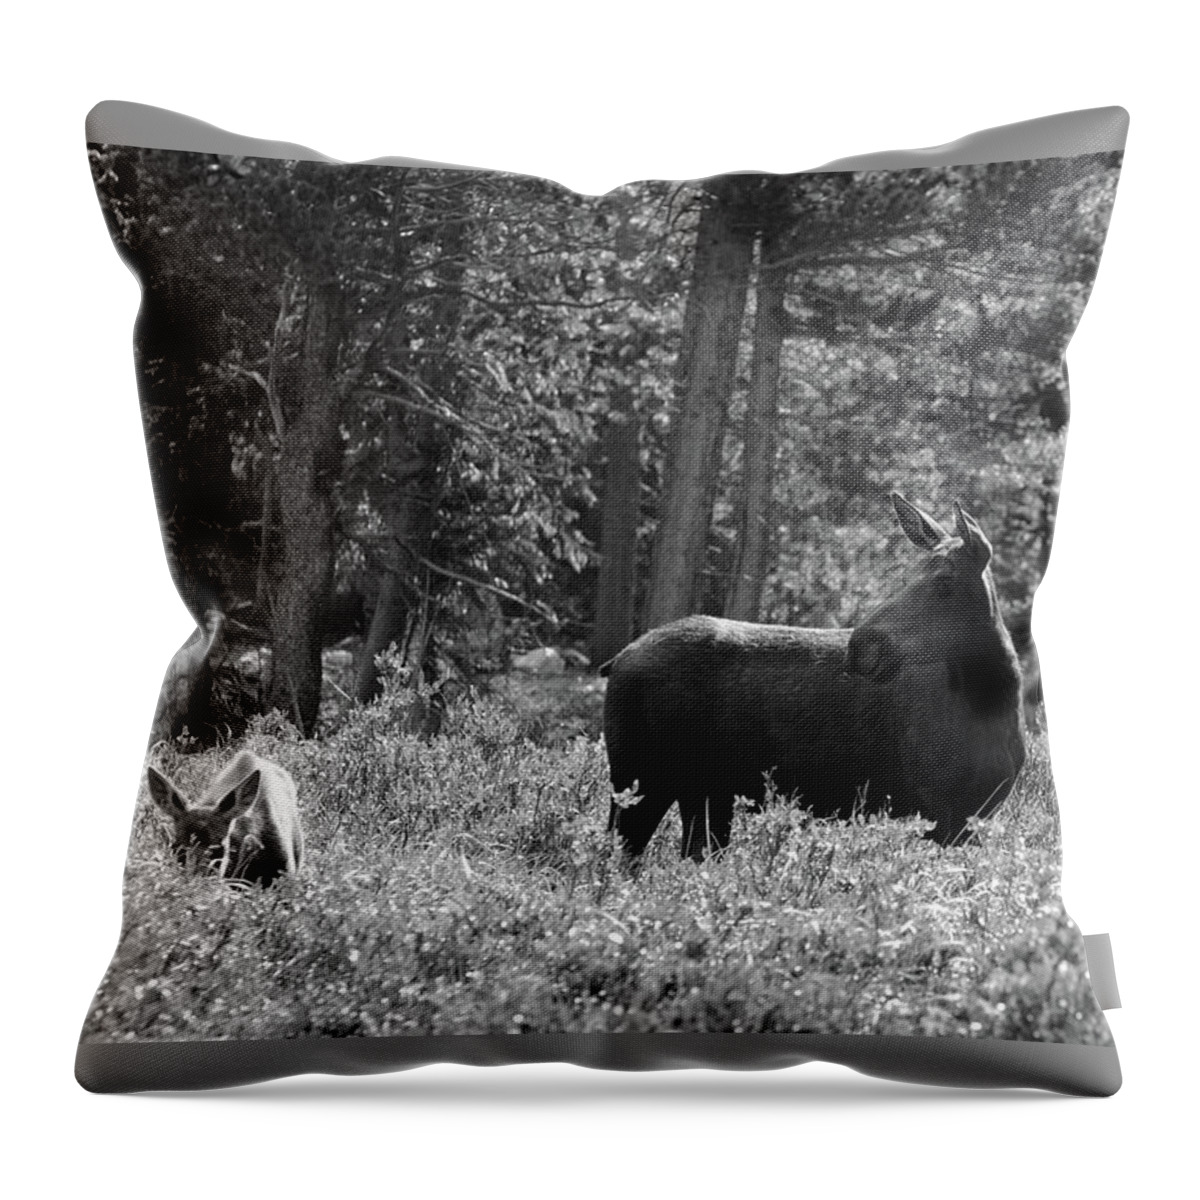 Photography Throw Pillow featuring the photograph Moose - Keeping Watch, Northern Colorado by Richard Porter